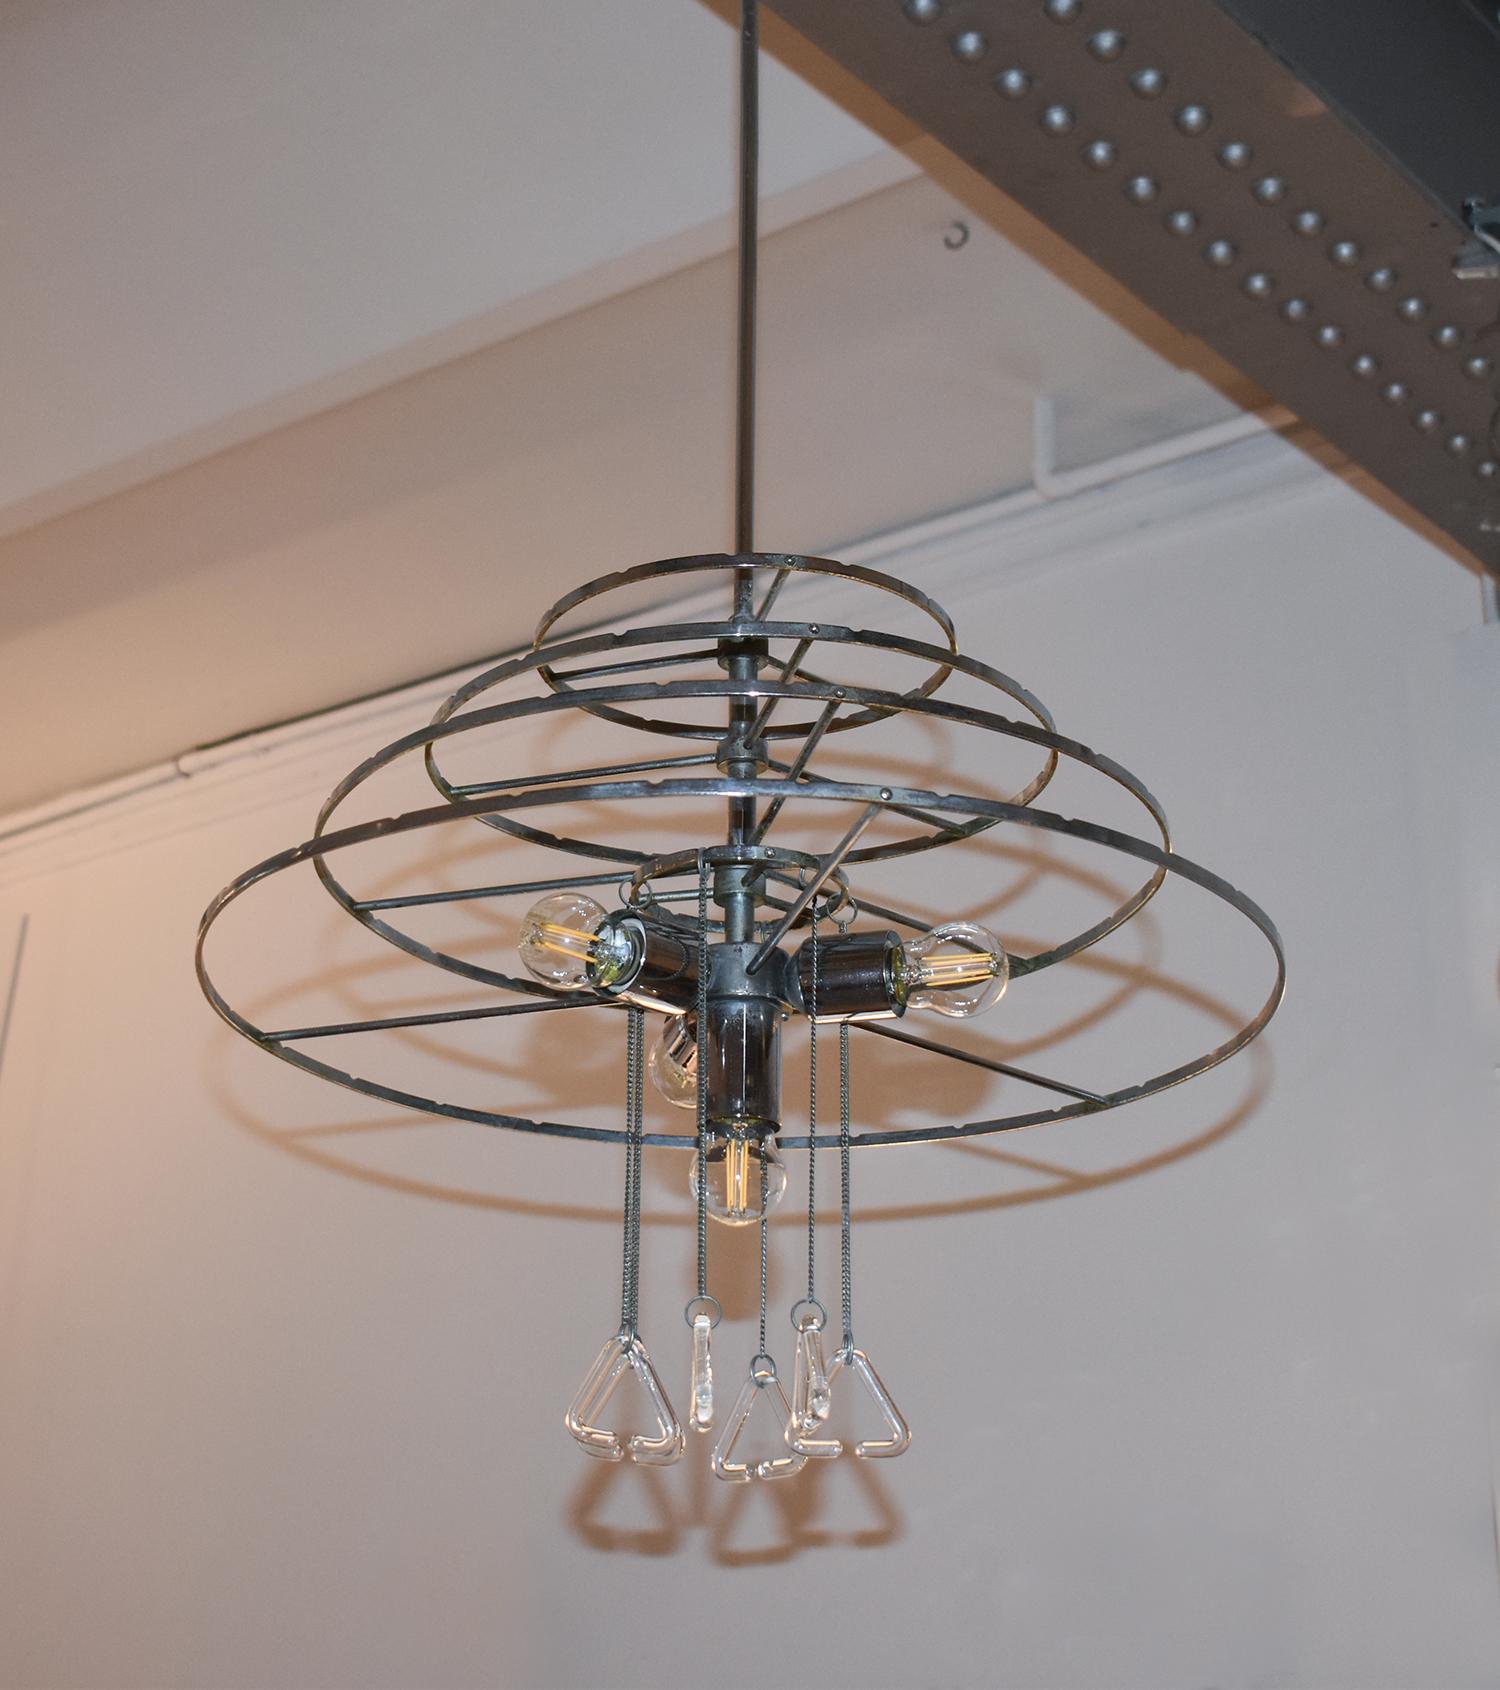 Italian chandelier from 1970's, in the manner of Angelo Mangiarotti works. Made of many  of transparent murano glass pieces  interlaced with triangular form and chrome structure with four lights.
The lamp has been rewired again.
